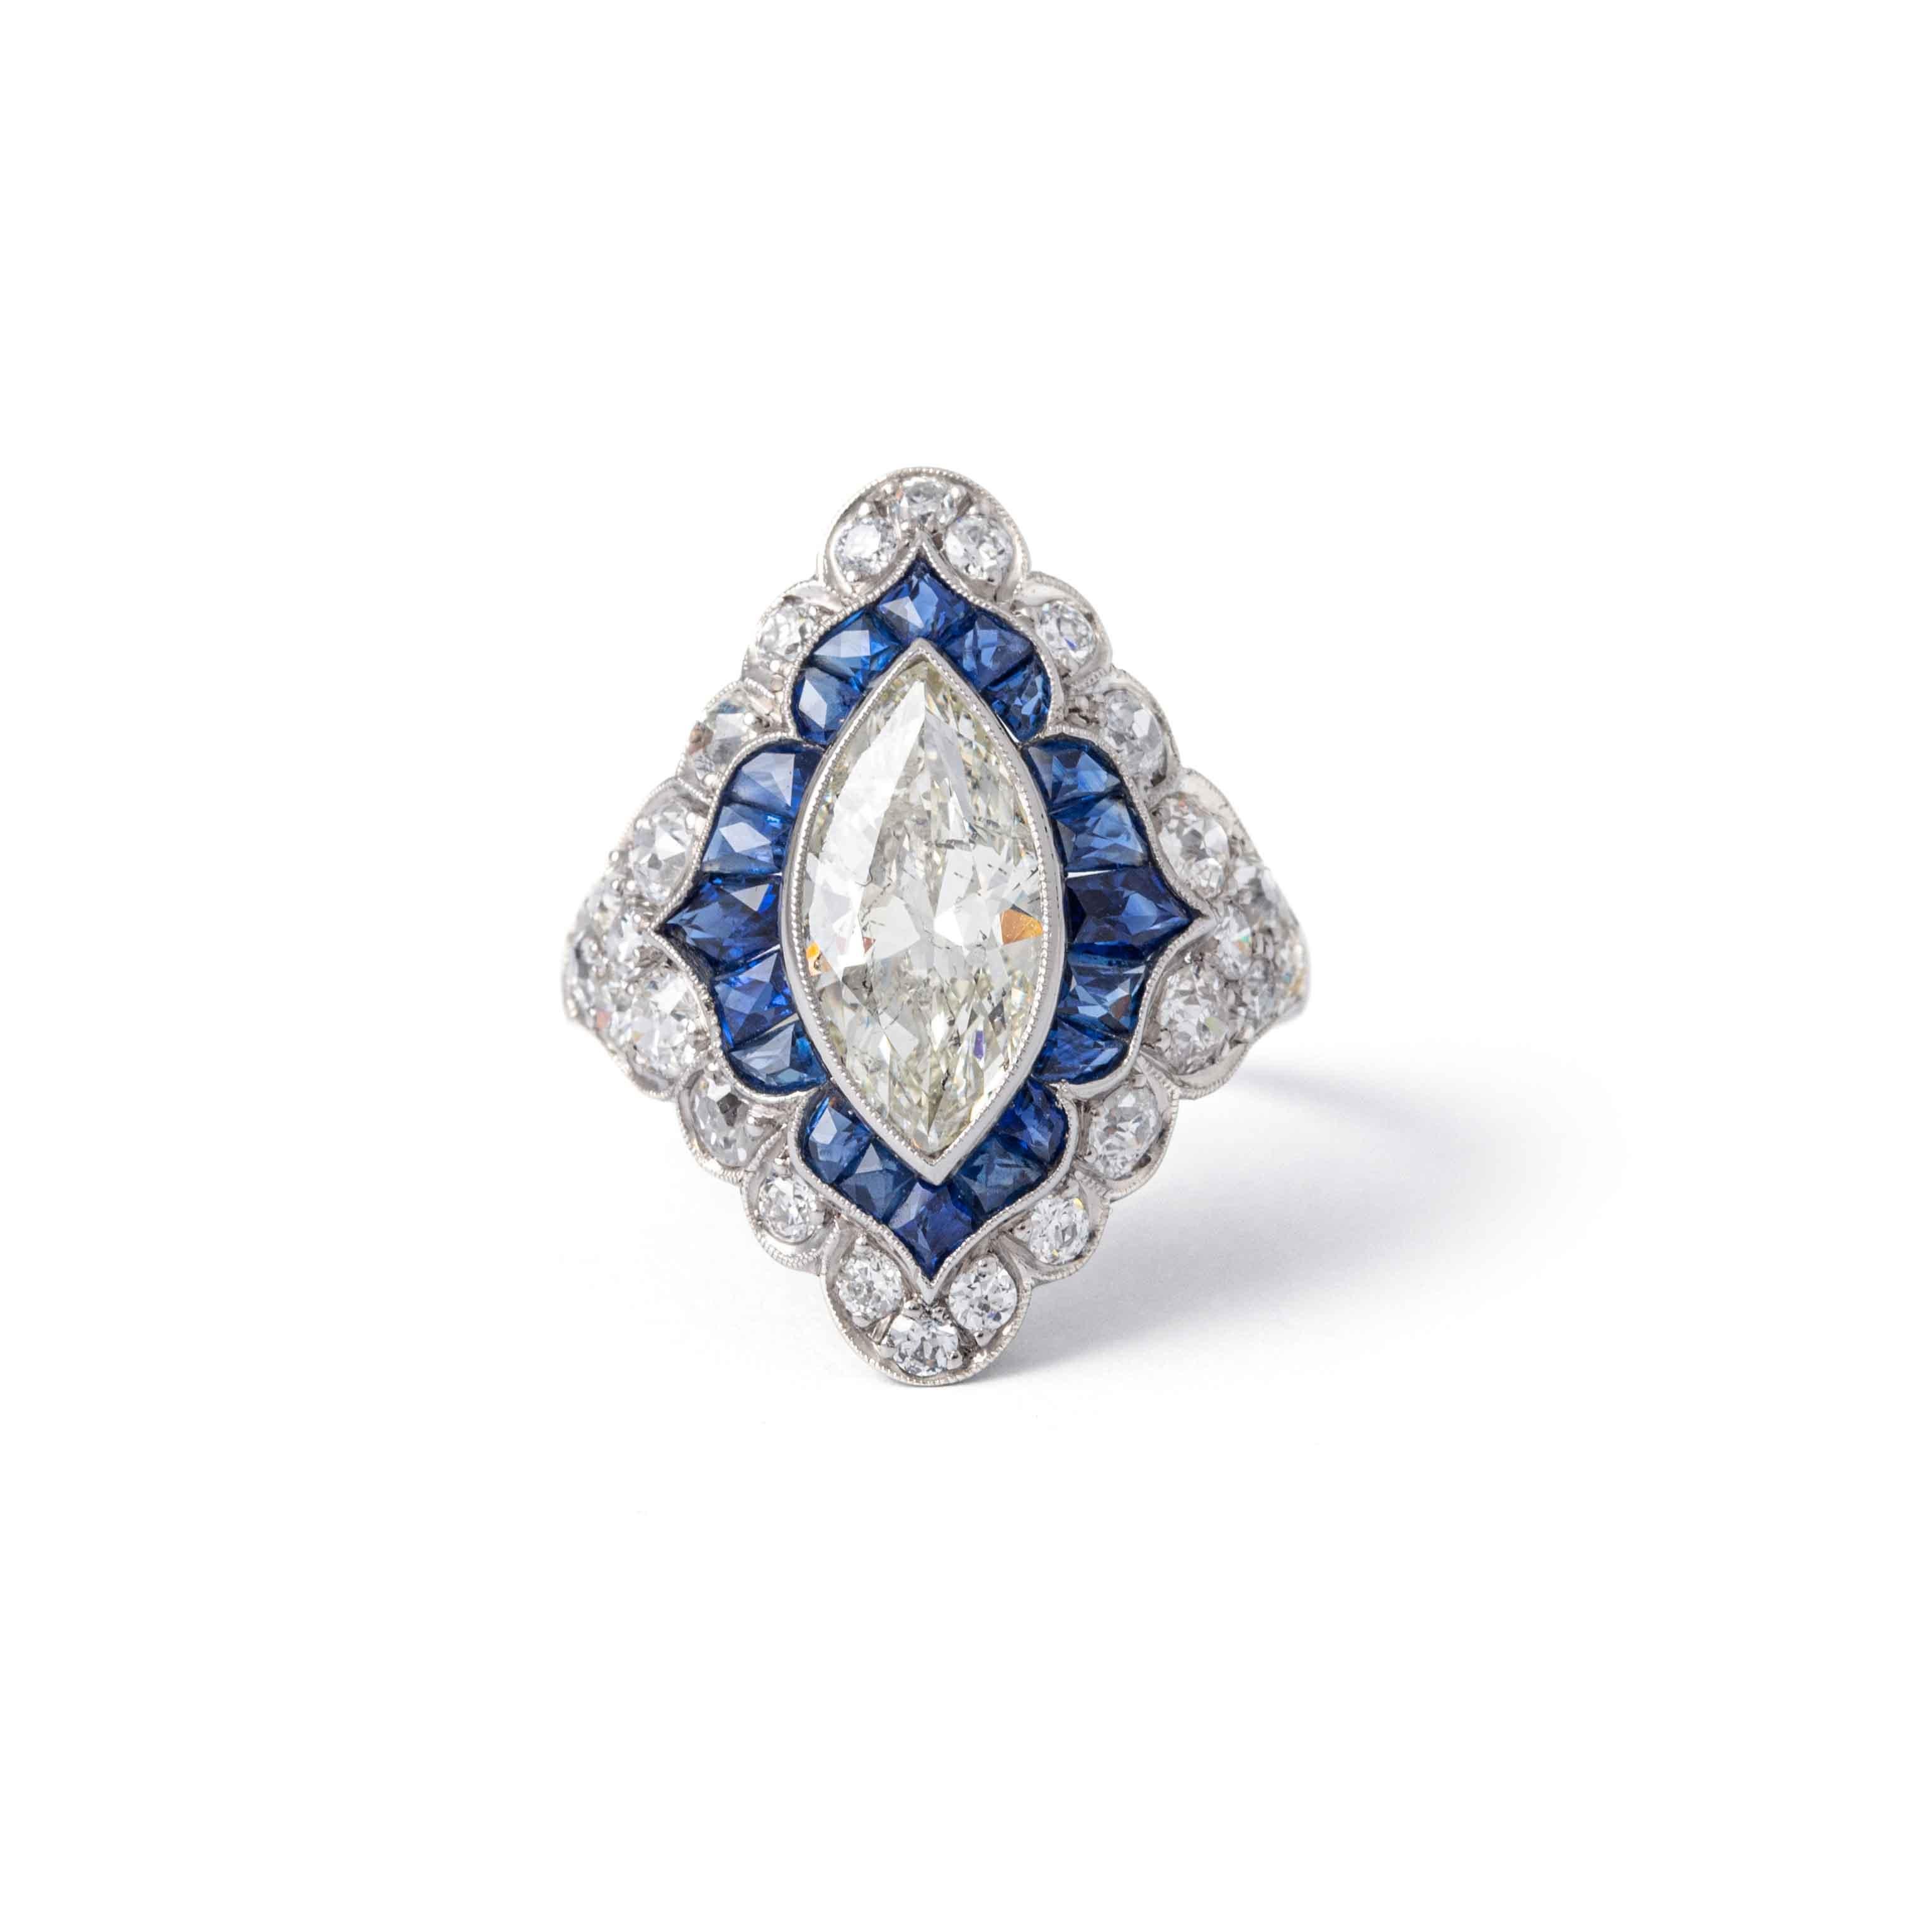 Art Deco over 2 carat Diamond Marquise Sapphire Platinum Ring.
Marquise Diamond approx. 2.20 carat M P1, blue sapphire approx. 0.80 carat and diamonds pave 1.20 carat.

Size: 56 / 7.75 US,
Total weight: 6.55 grams.